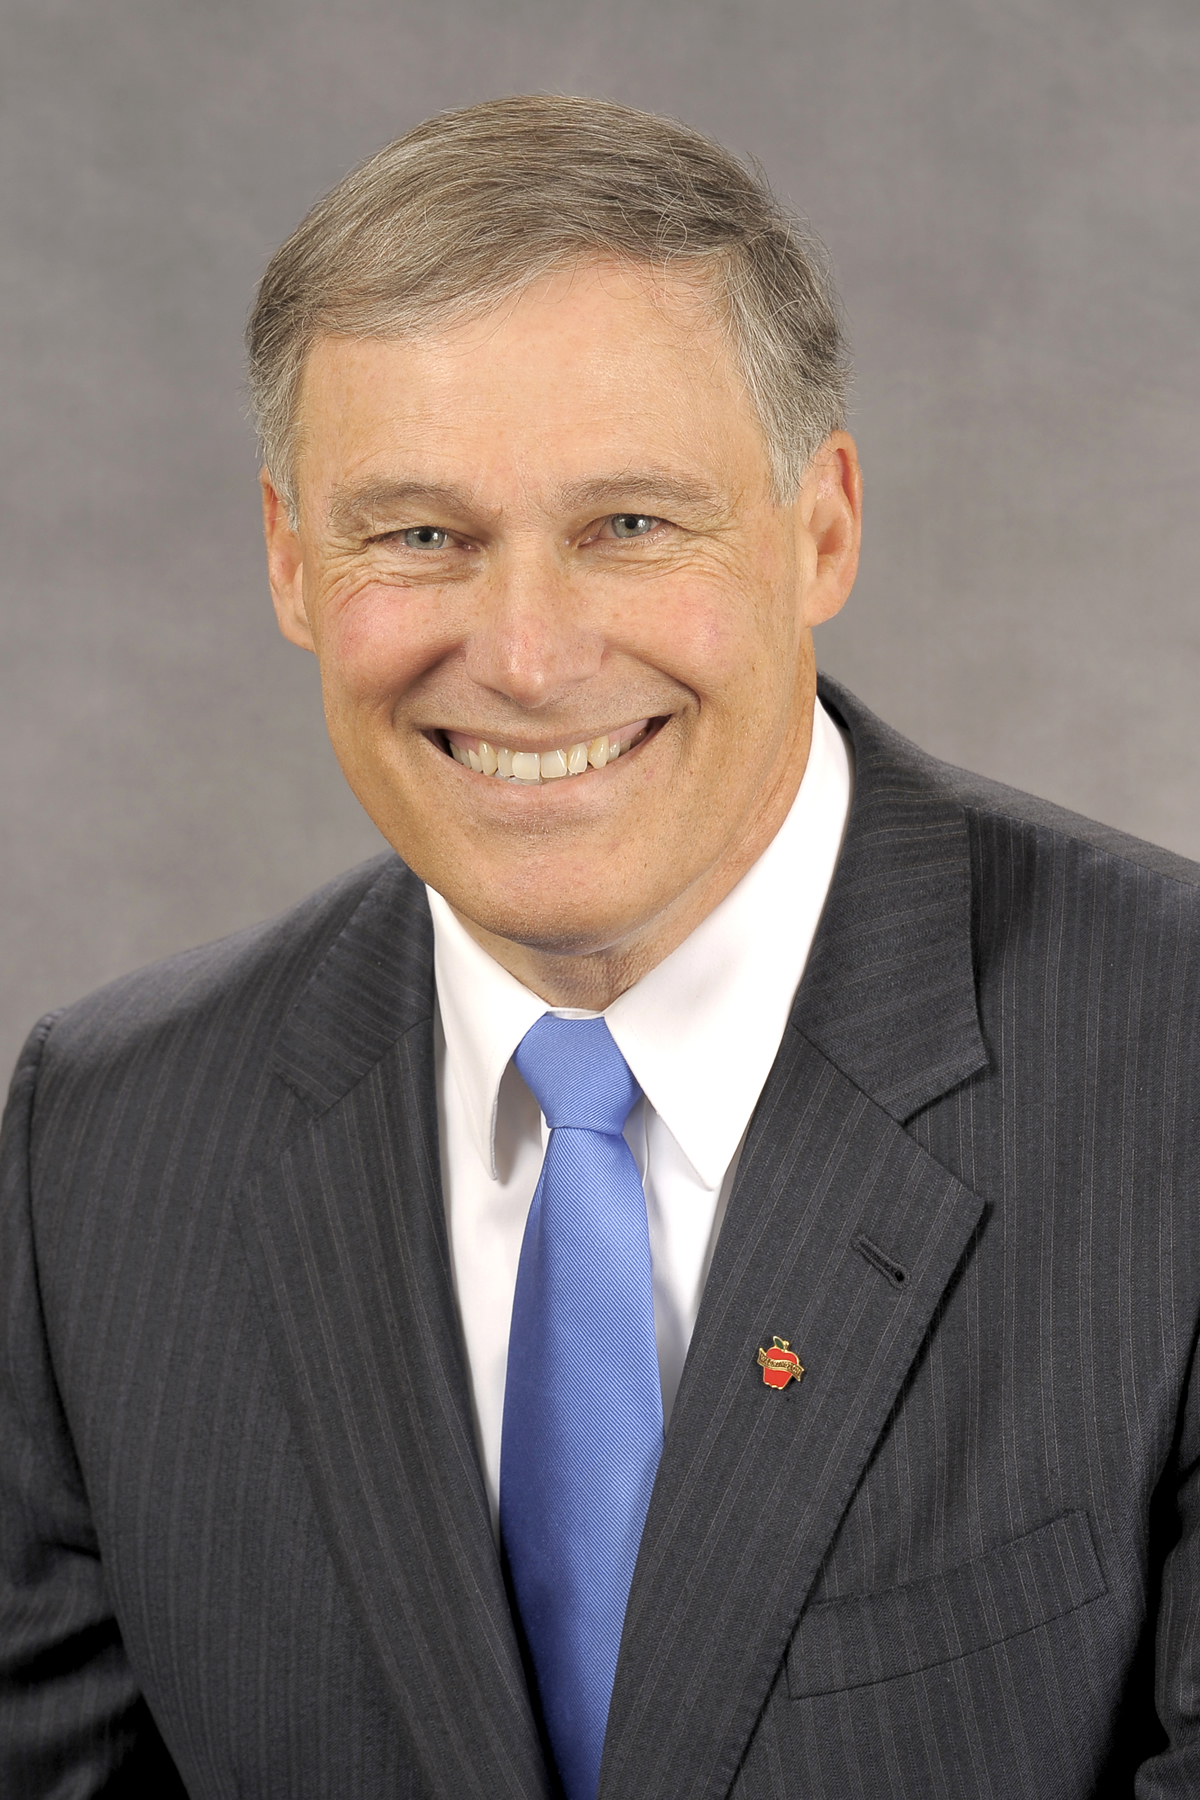 Gov. Inslee Speech at Clean Energy Conference in Seattle